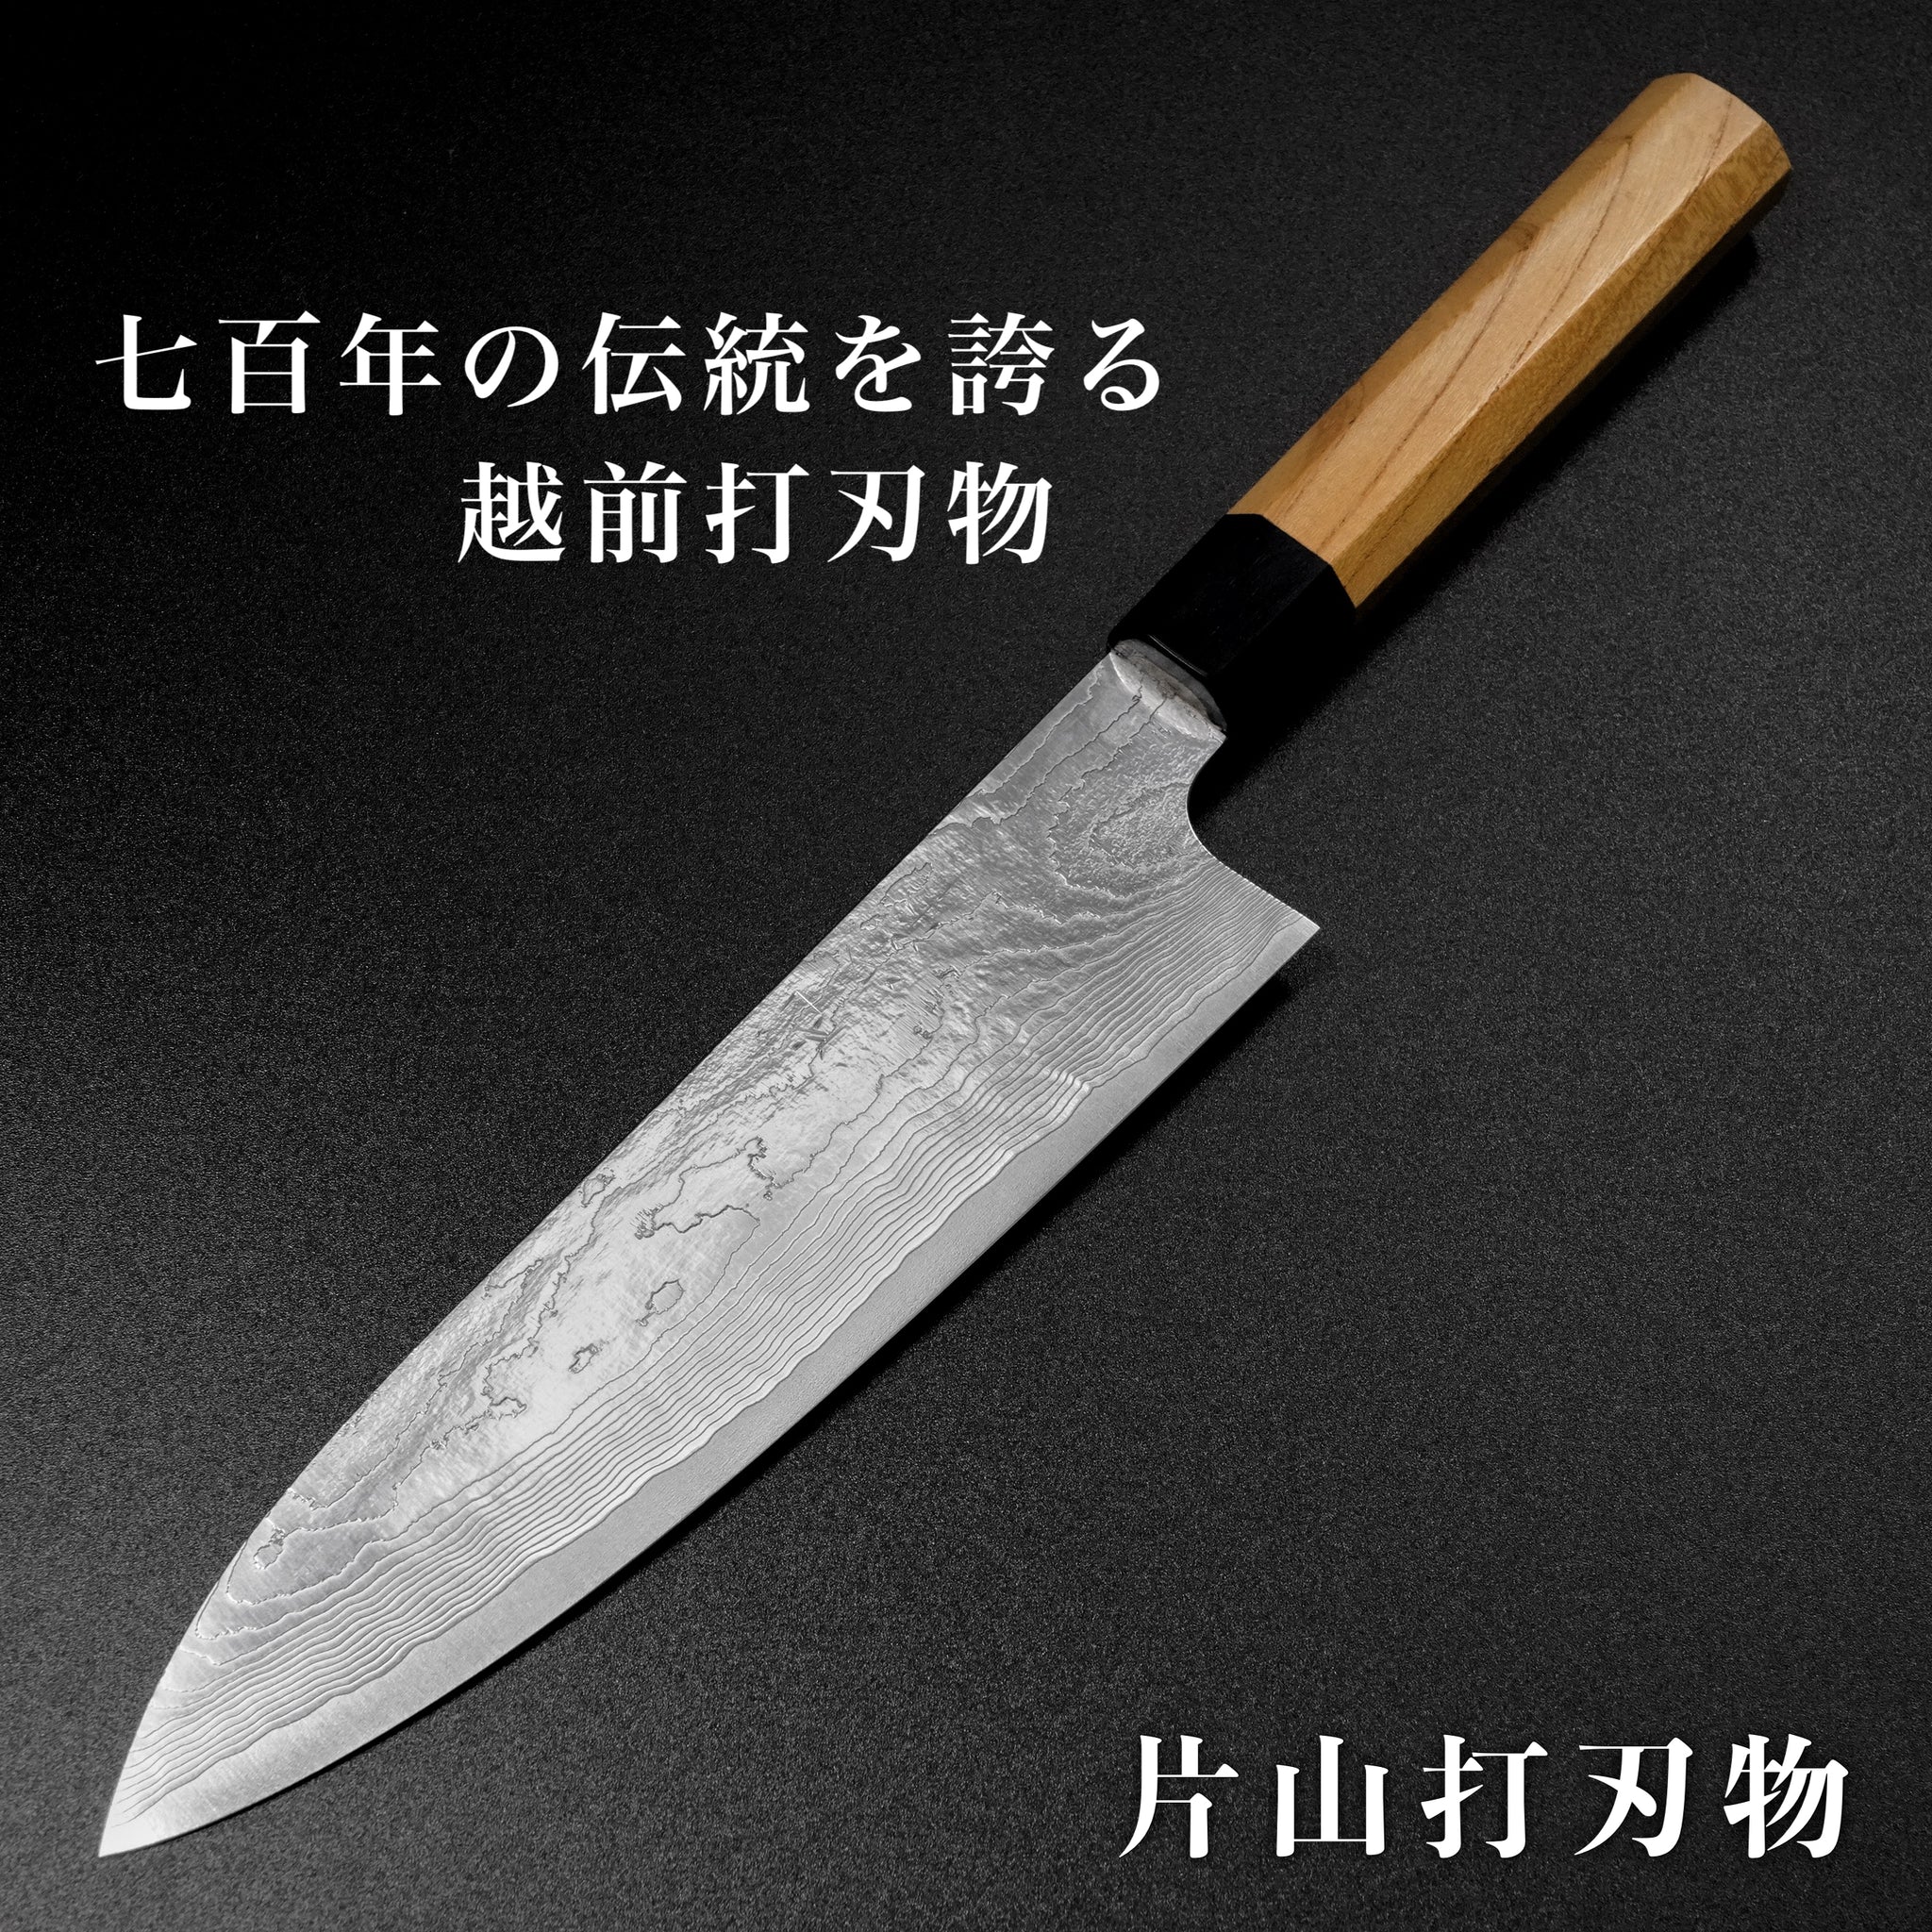 Gyuto Black Damascus Knife 210 mm (8 in) Stainless Clad VG (Gold